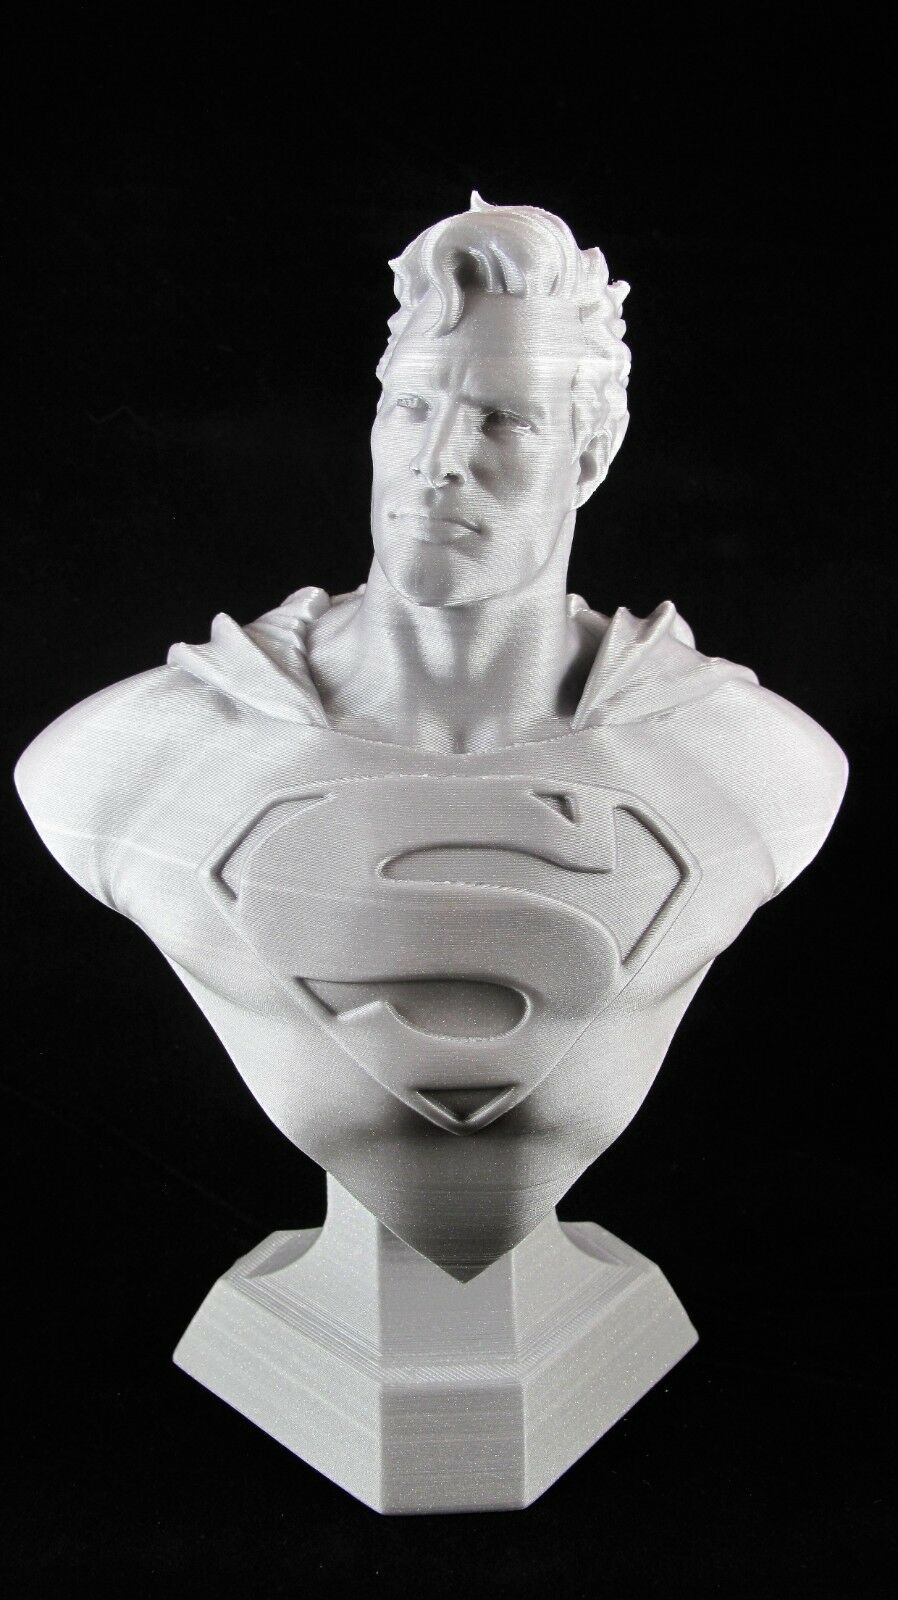 3d Printed Superman Bust - 9" Tall - Silver